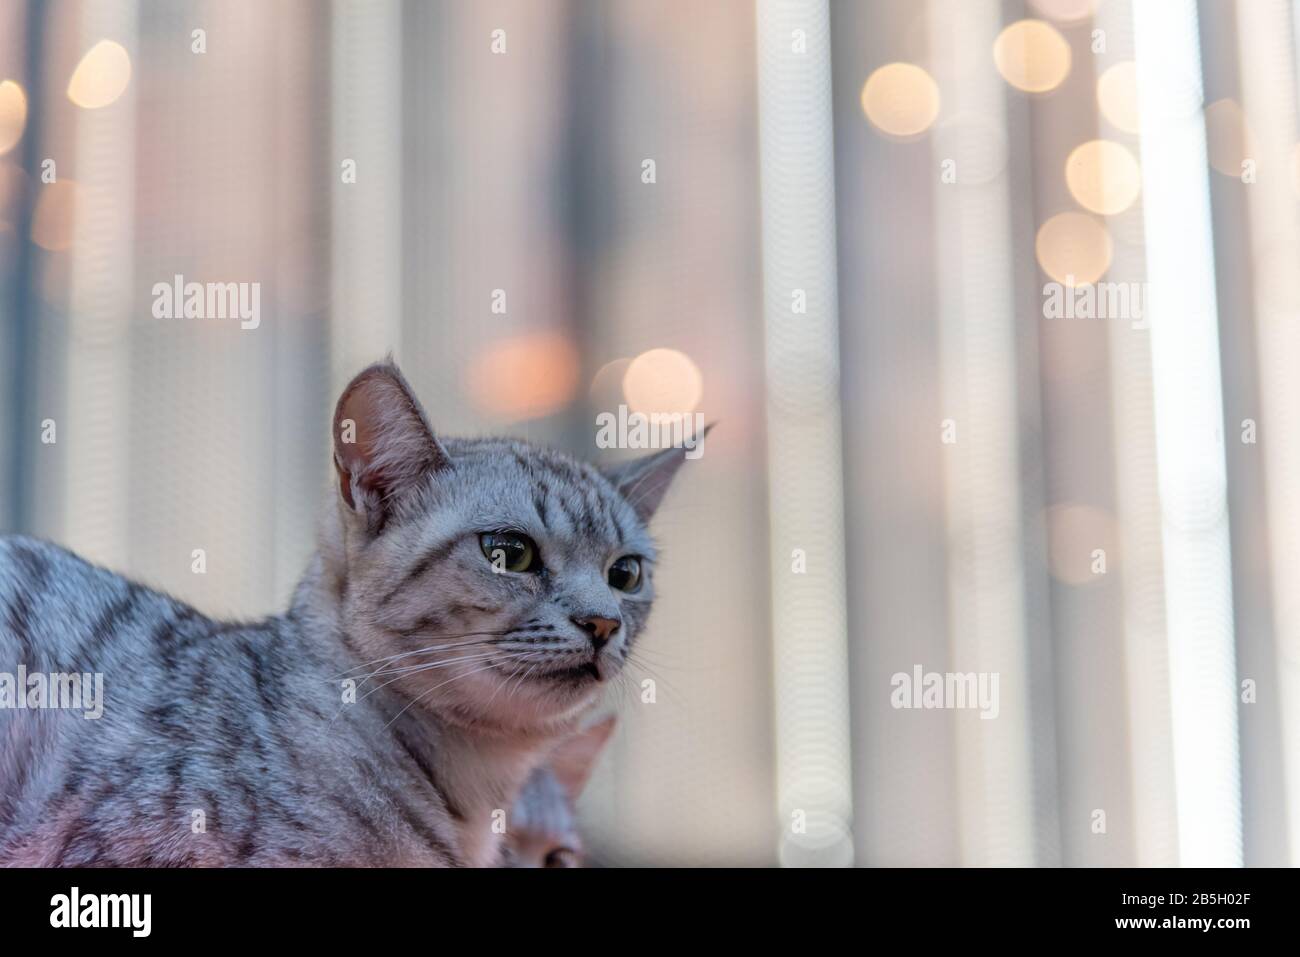 Portrait of a pretty cat, close up shot with Blur background Stock Photo